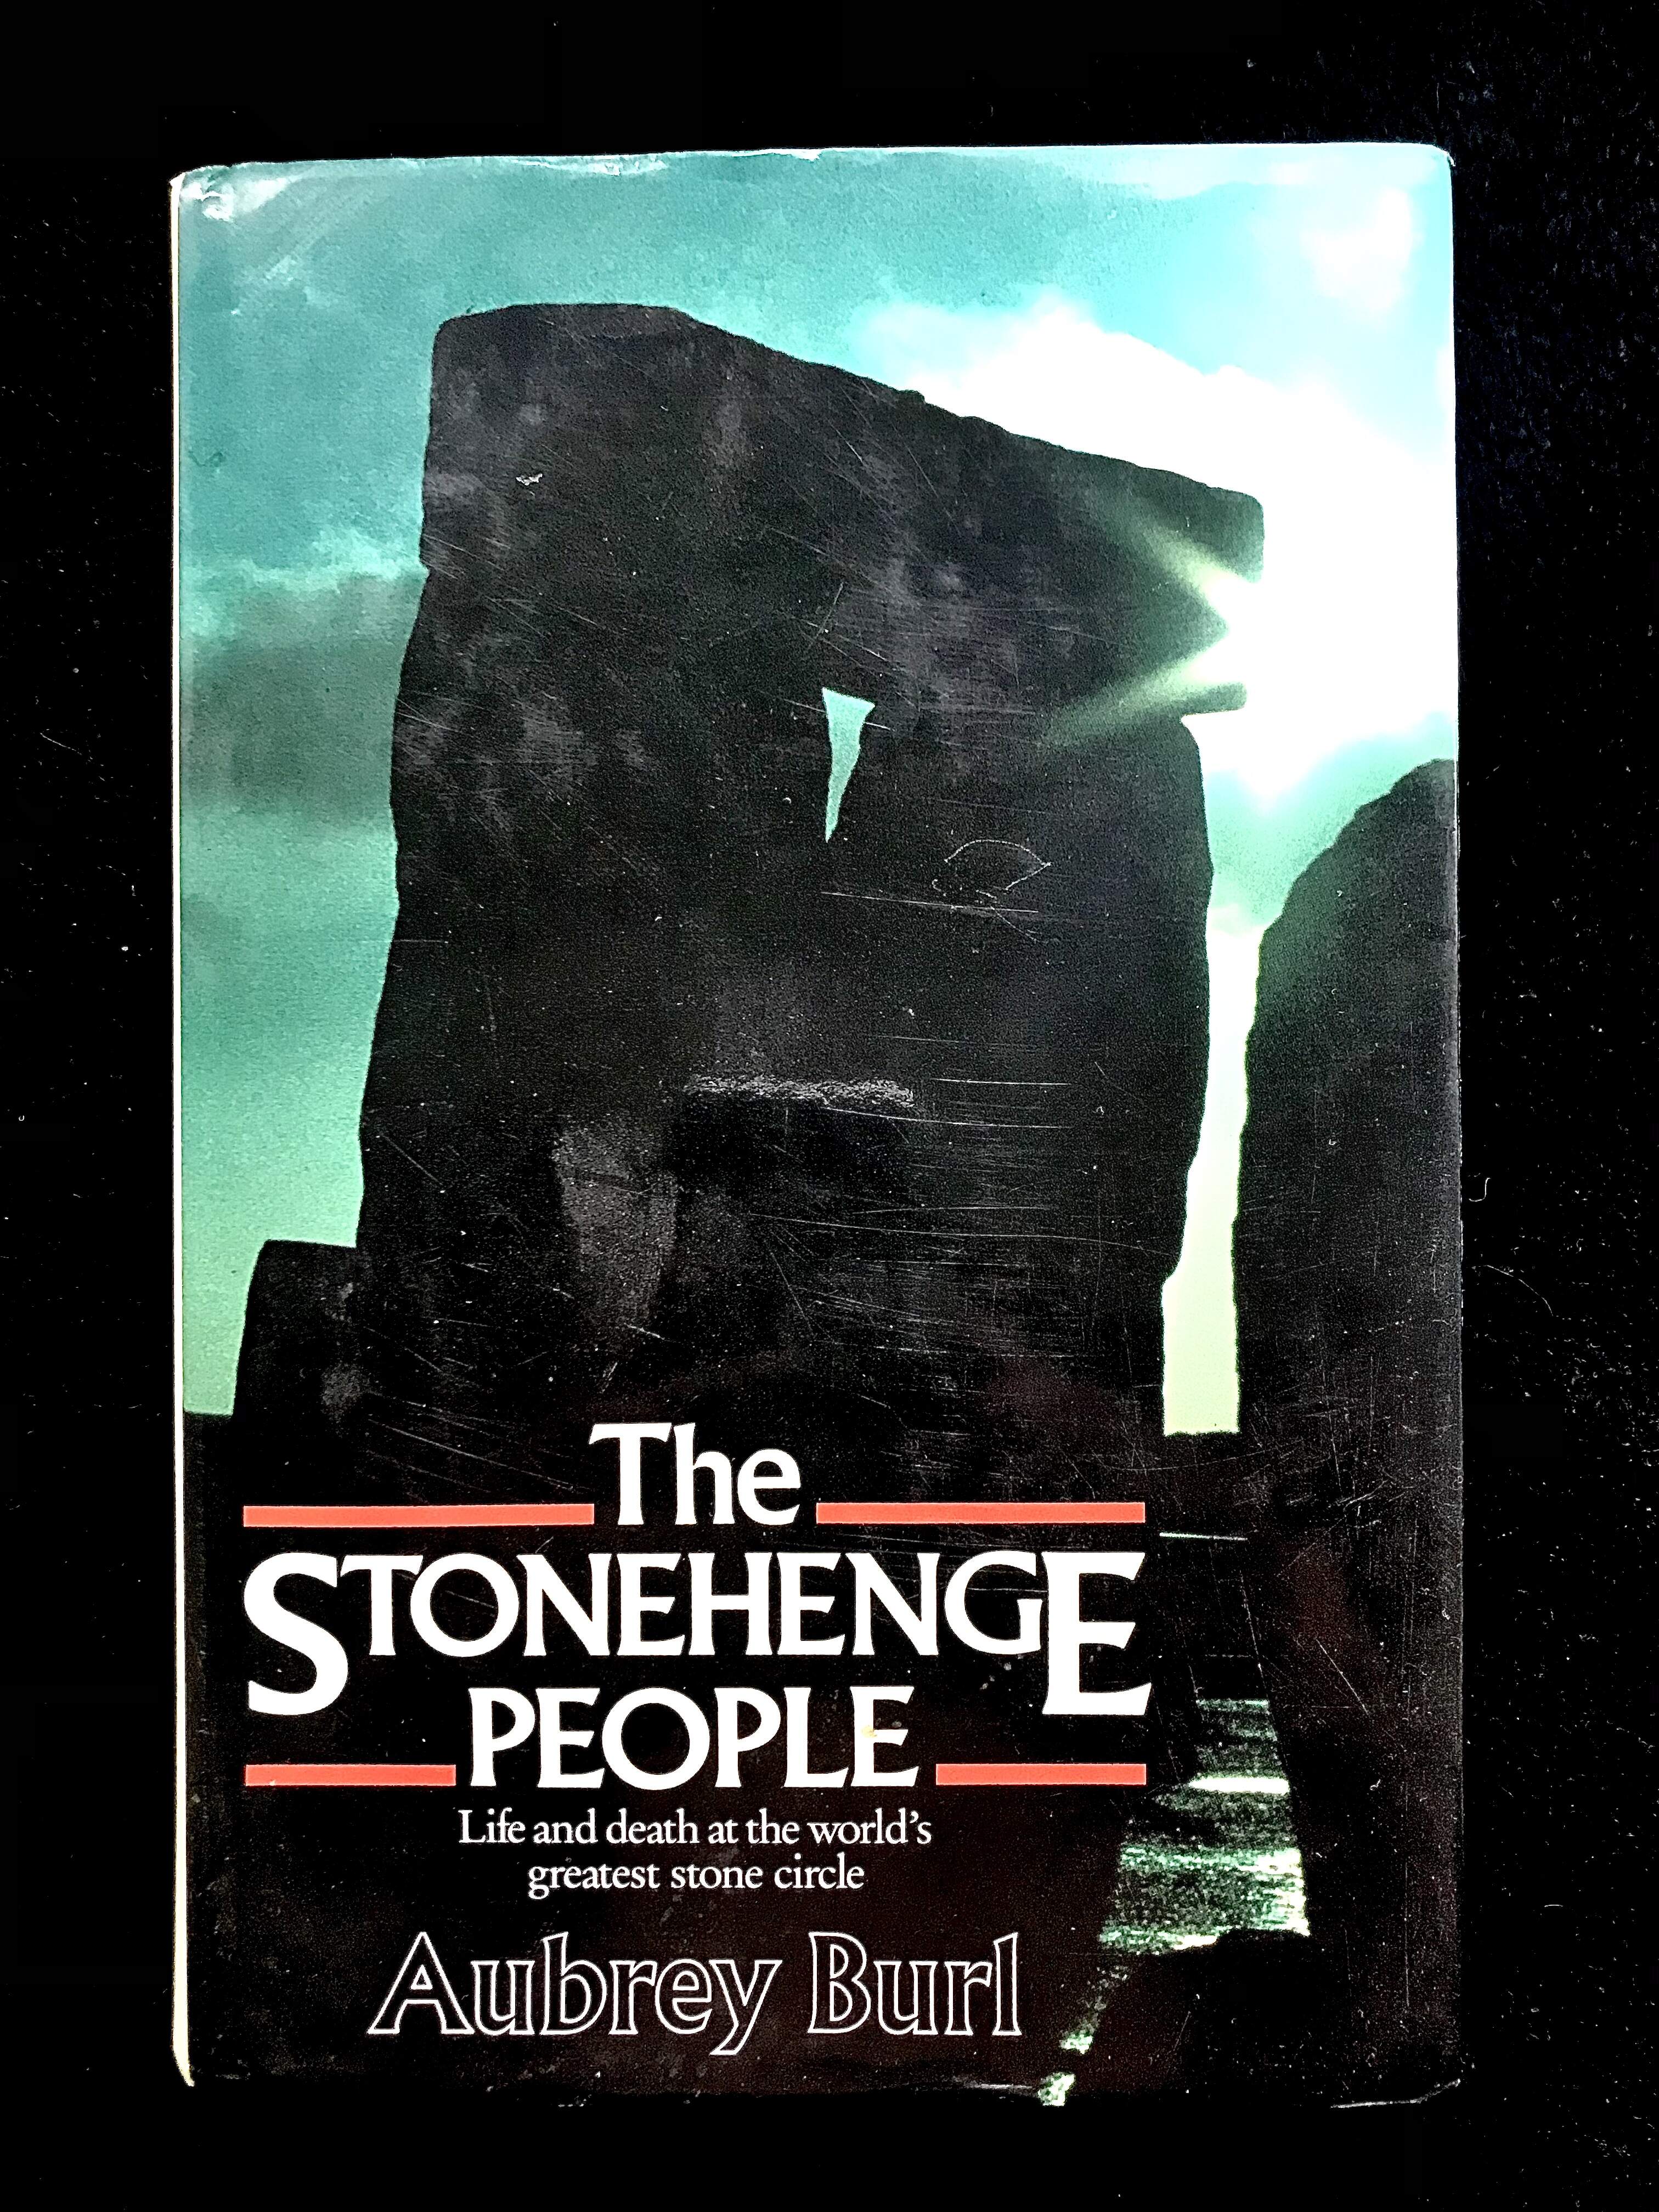 The Stonehenge People: Life and Death at the World's Greatest Stone Circle by Aubrey Burl